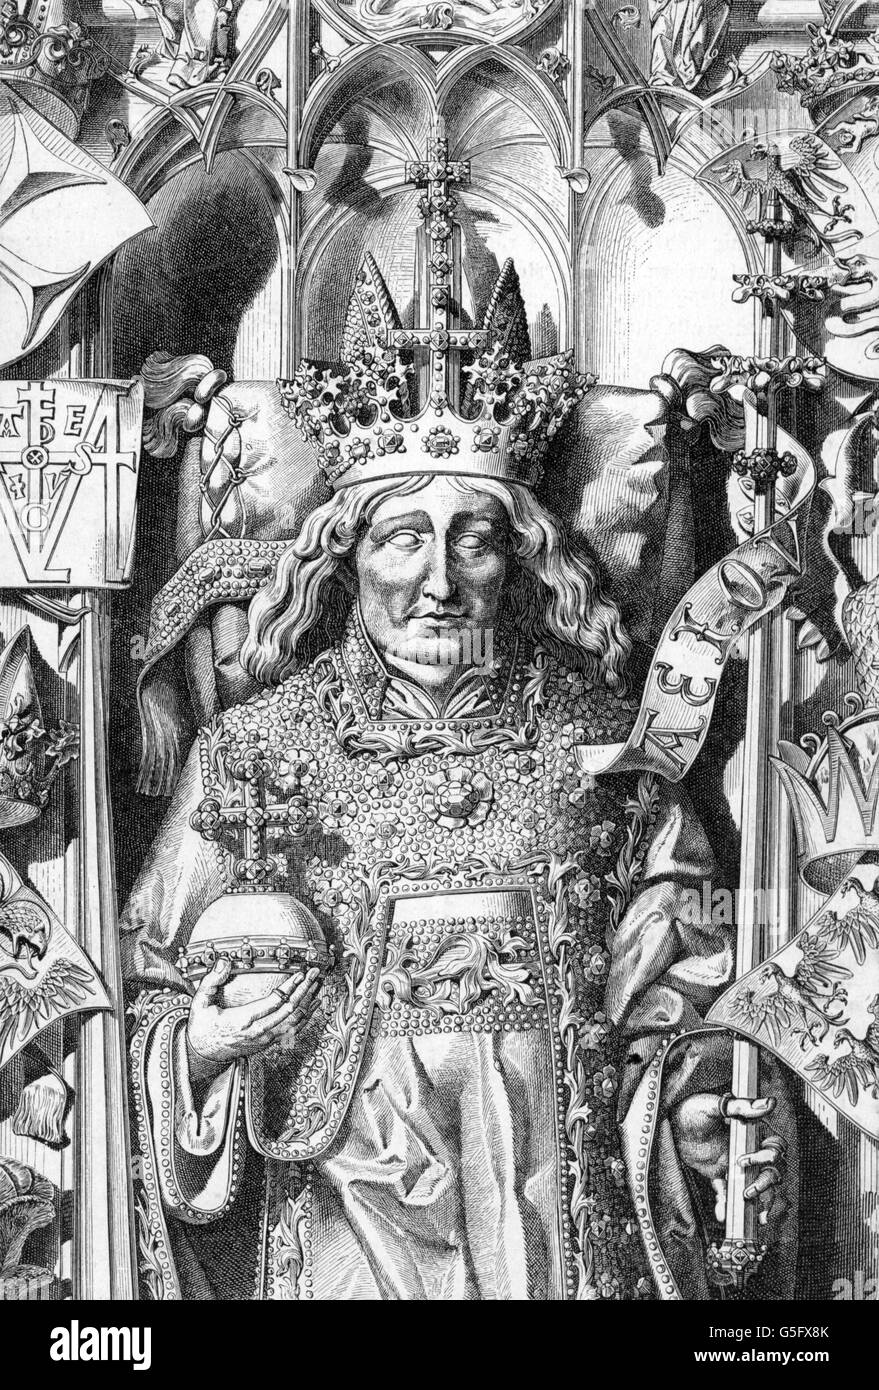 Frederick III 'the Peaceful', 21.9.1415 - 19.8.1493, Holy Roman Emperor 16.3.1452 - 19.8.1493, half length, sculpture, grave in St. Stephan's Cathedral, Vienna, 1493, wood engraving, 19th century, Stock Photo